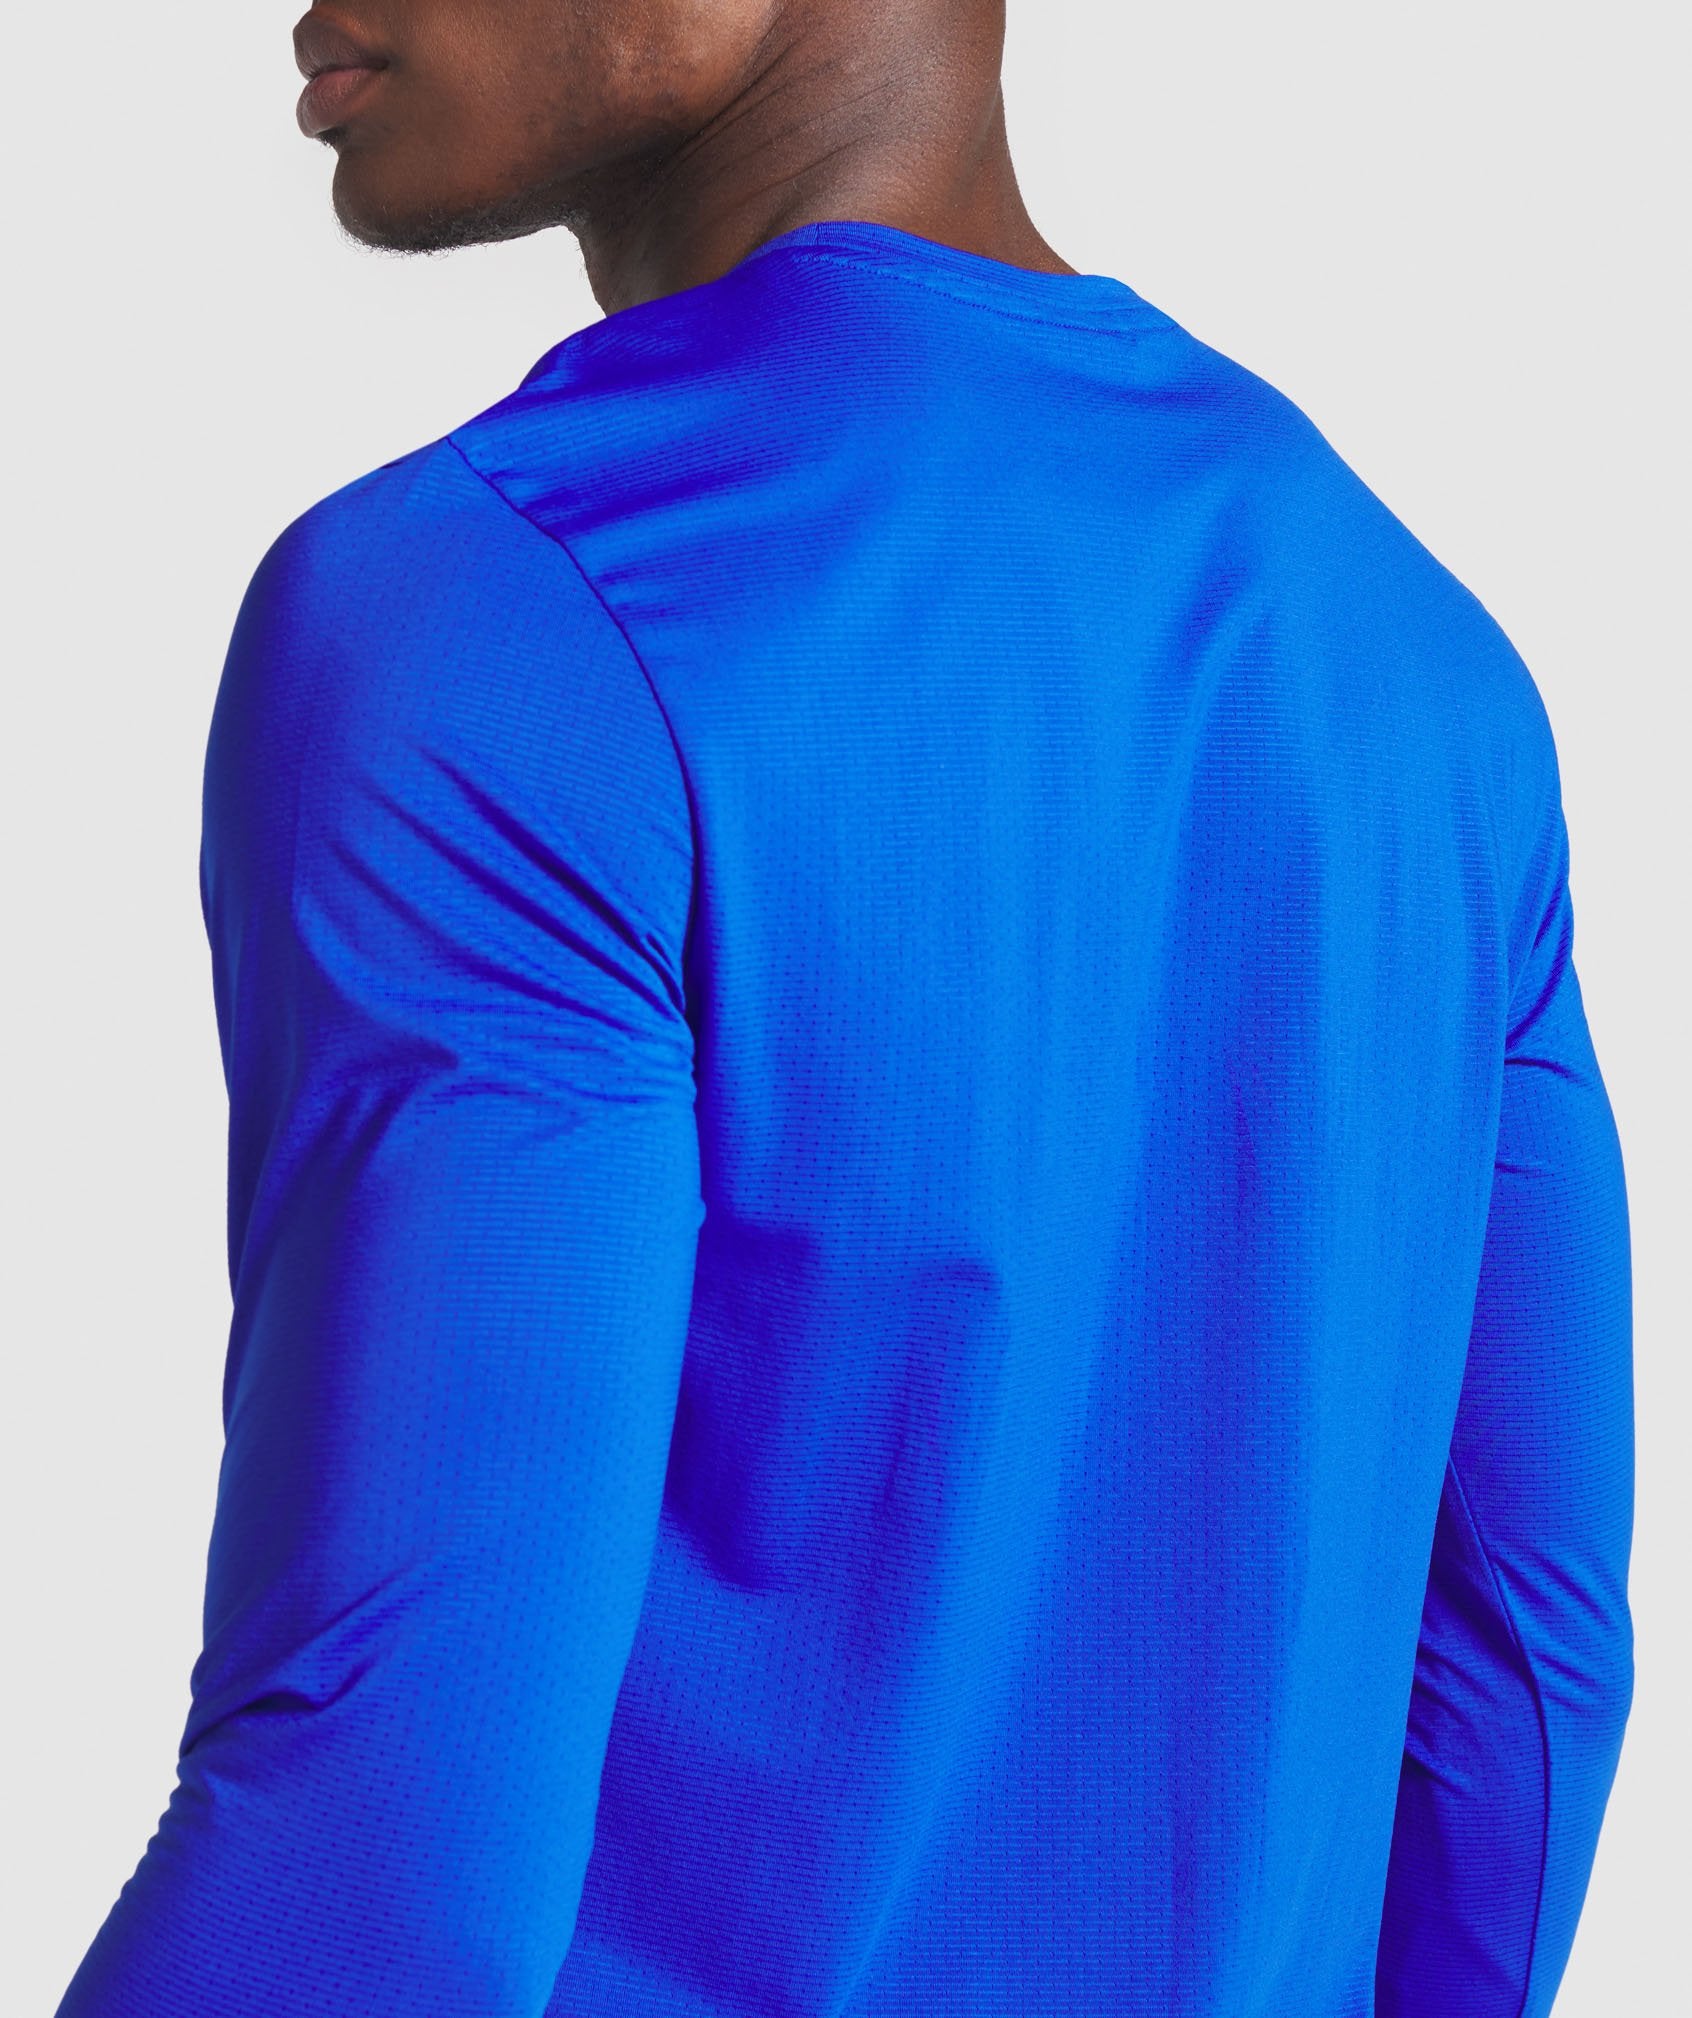 Arrival Long Sleeve Graphic T-Shirt in Blue - view 6